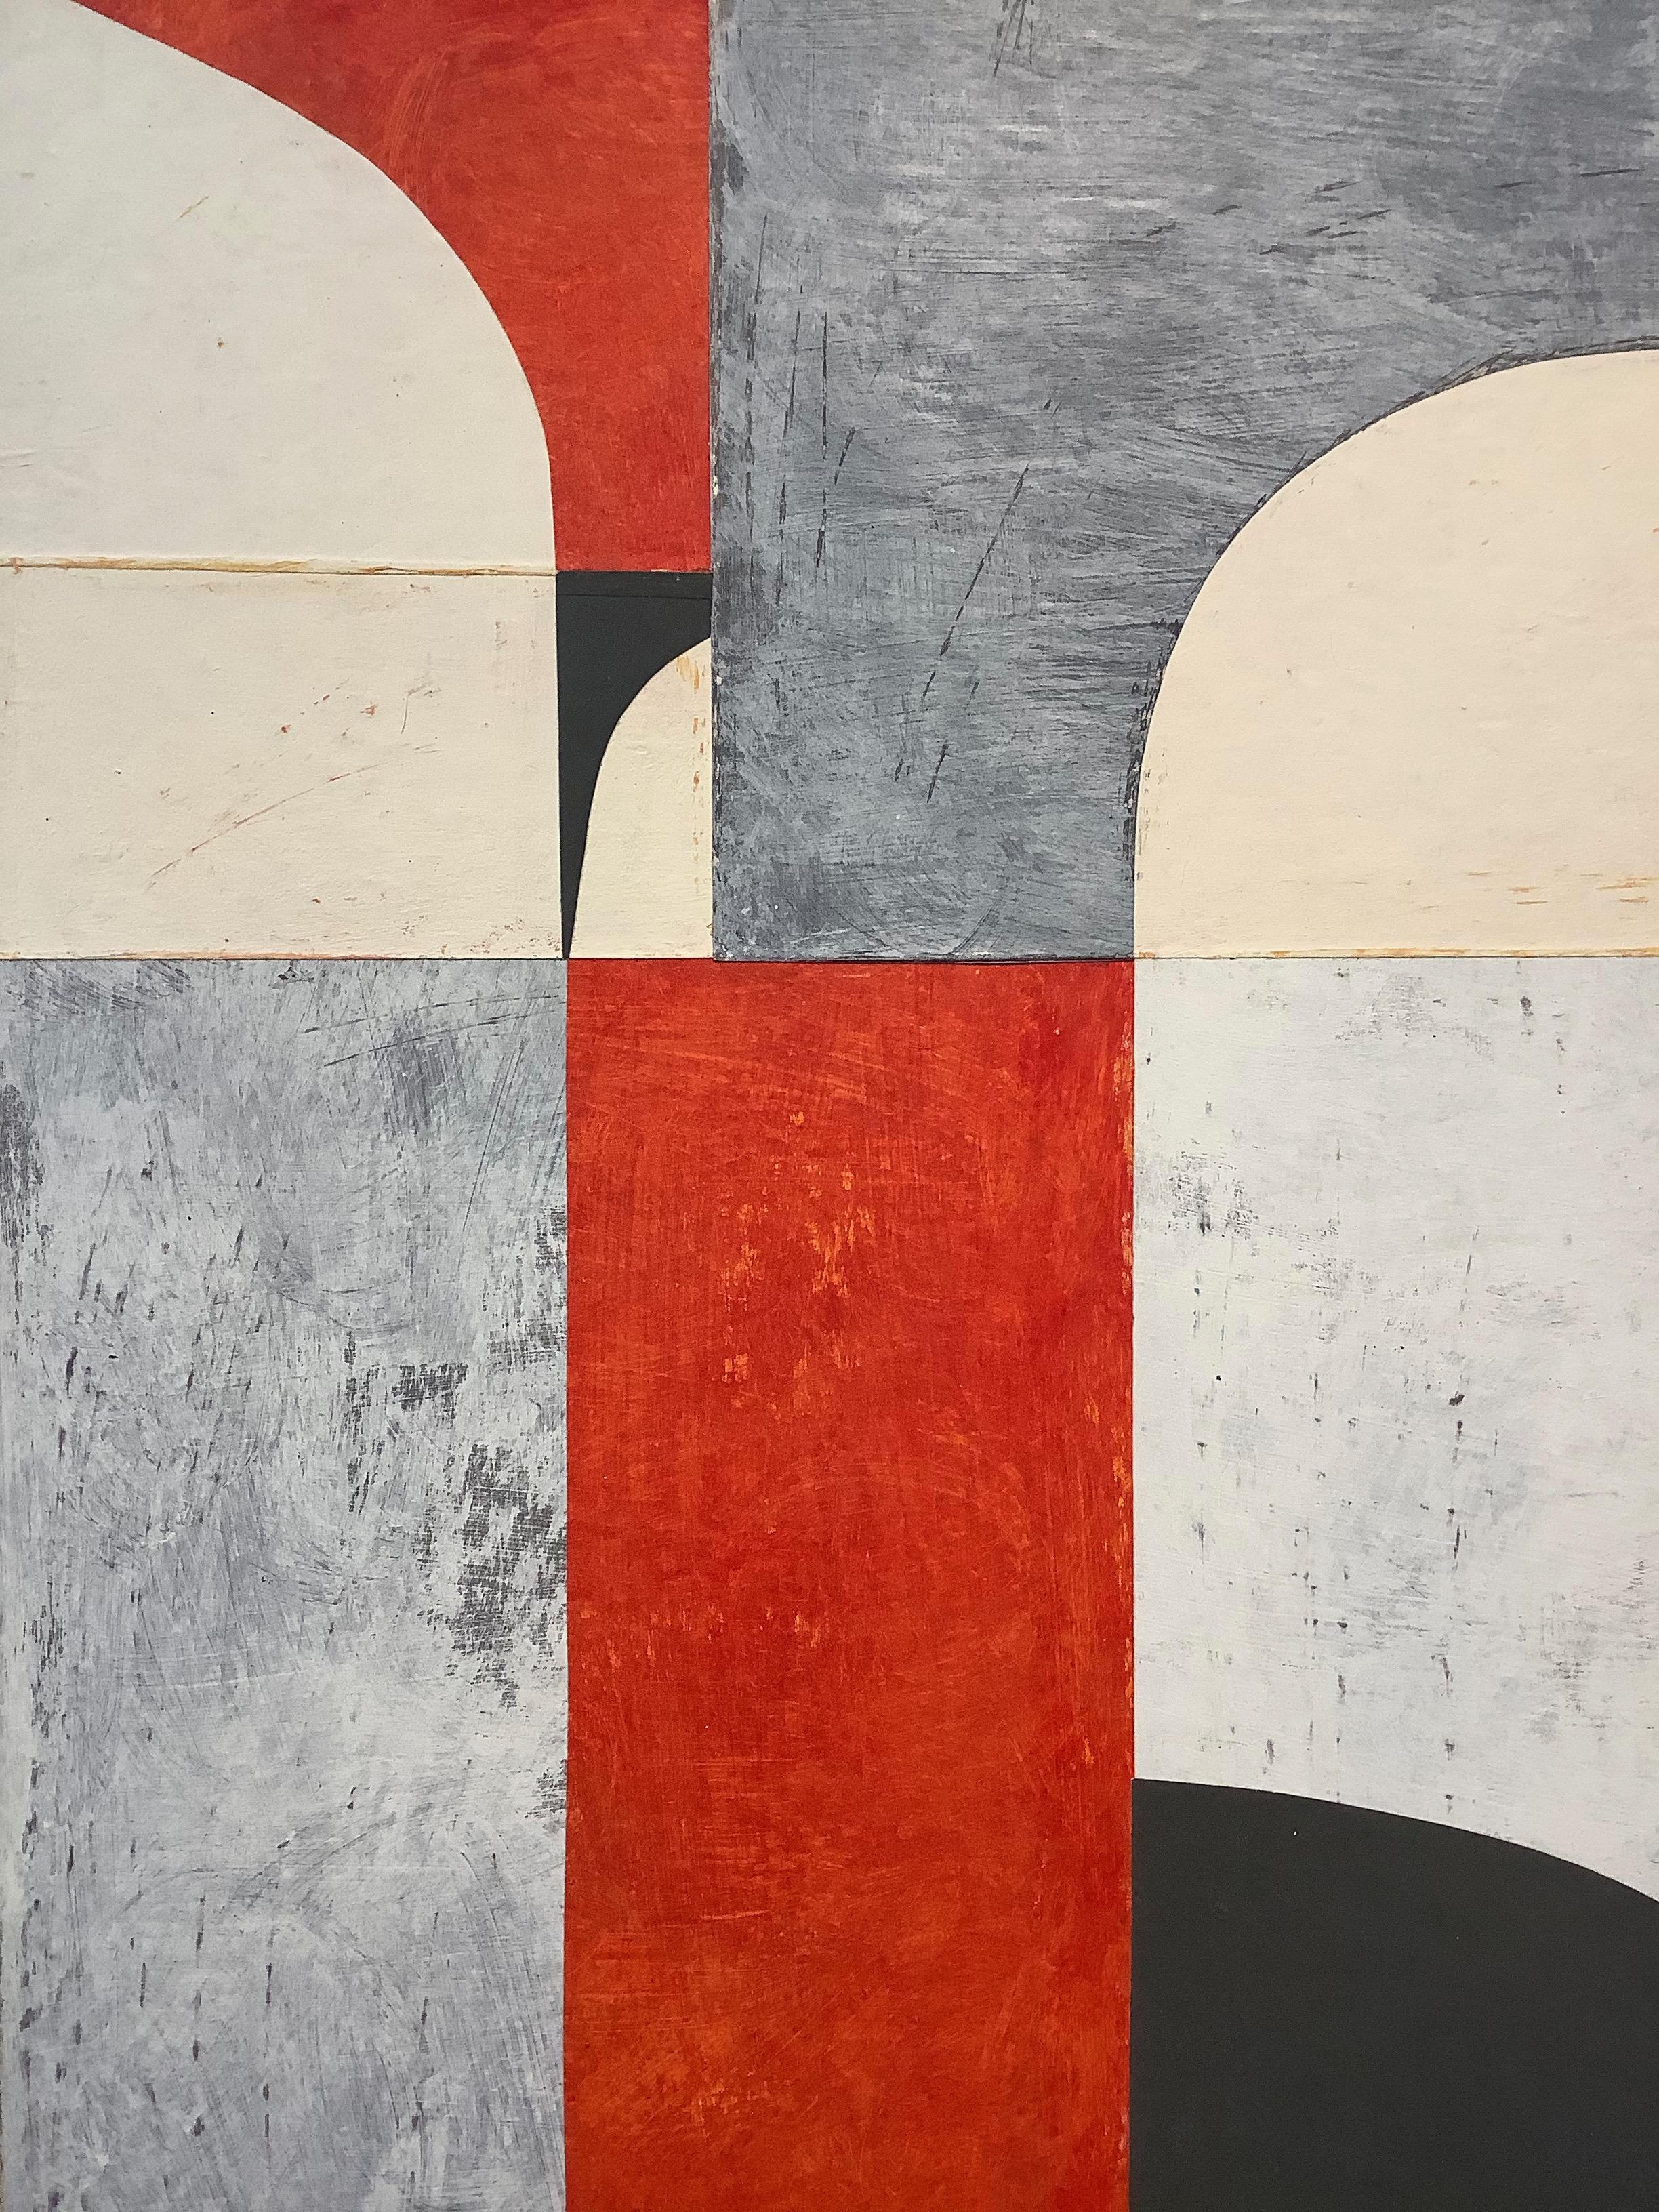 Daniel Anselmi uses painting and collage to explore the various ways in which color, line, and form can be expressed abstractly. 

In this vertical painted paper collage on panel, smooth curvilinear and sharp angular forms intersect and overlap one